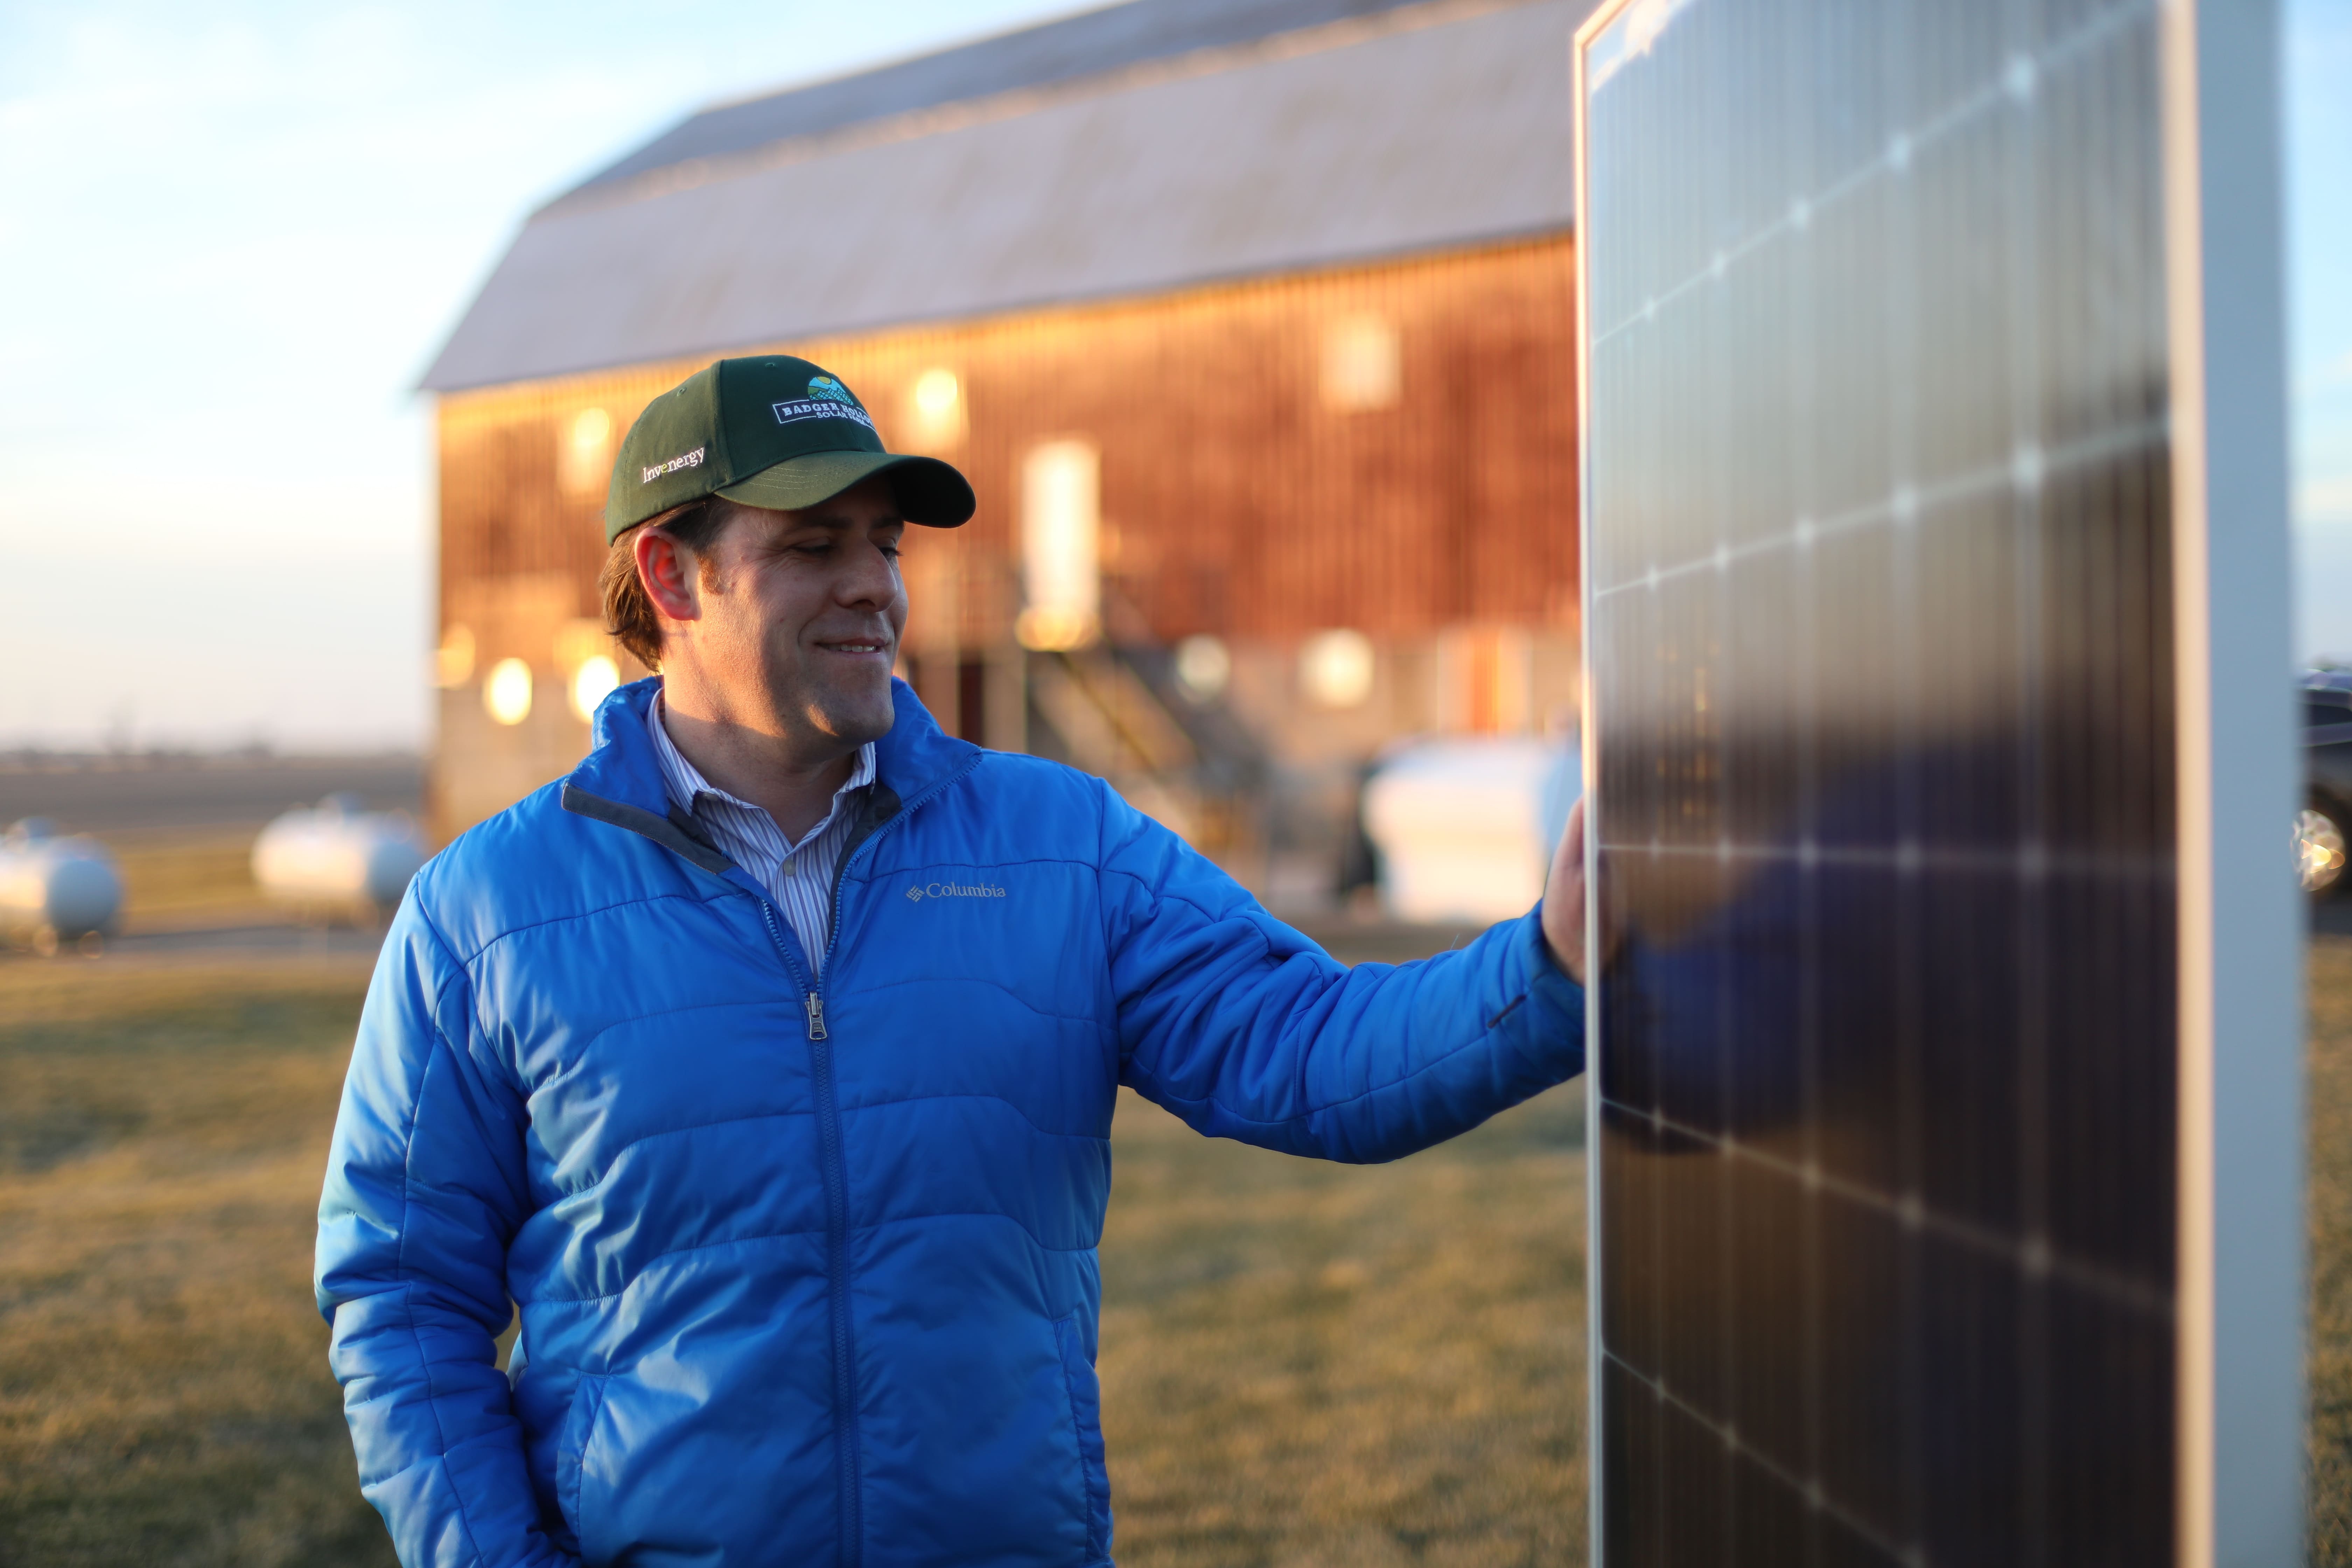 Man standing next to solar panel in field